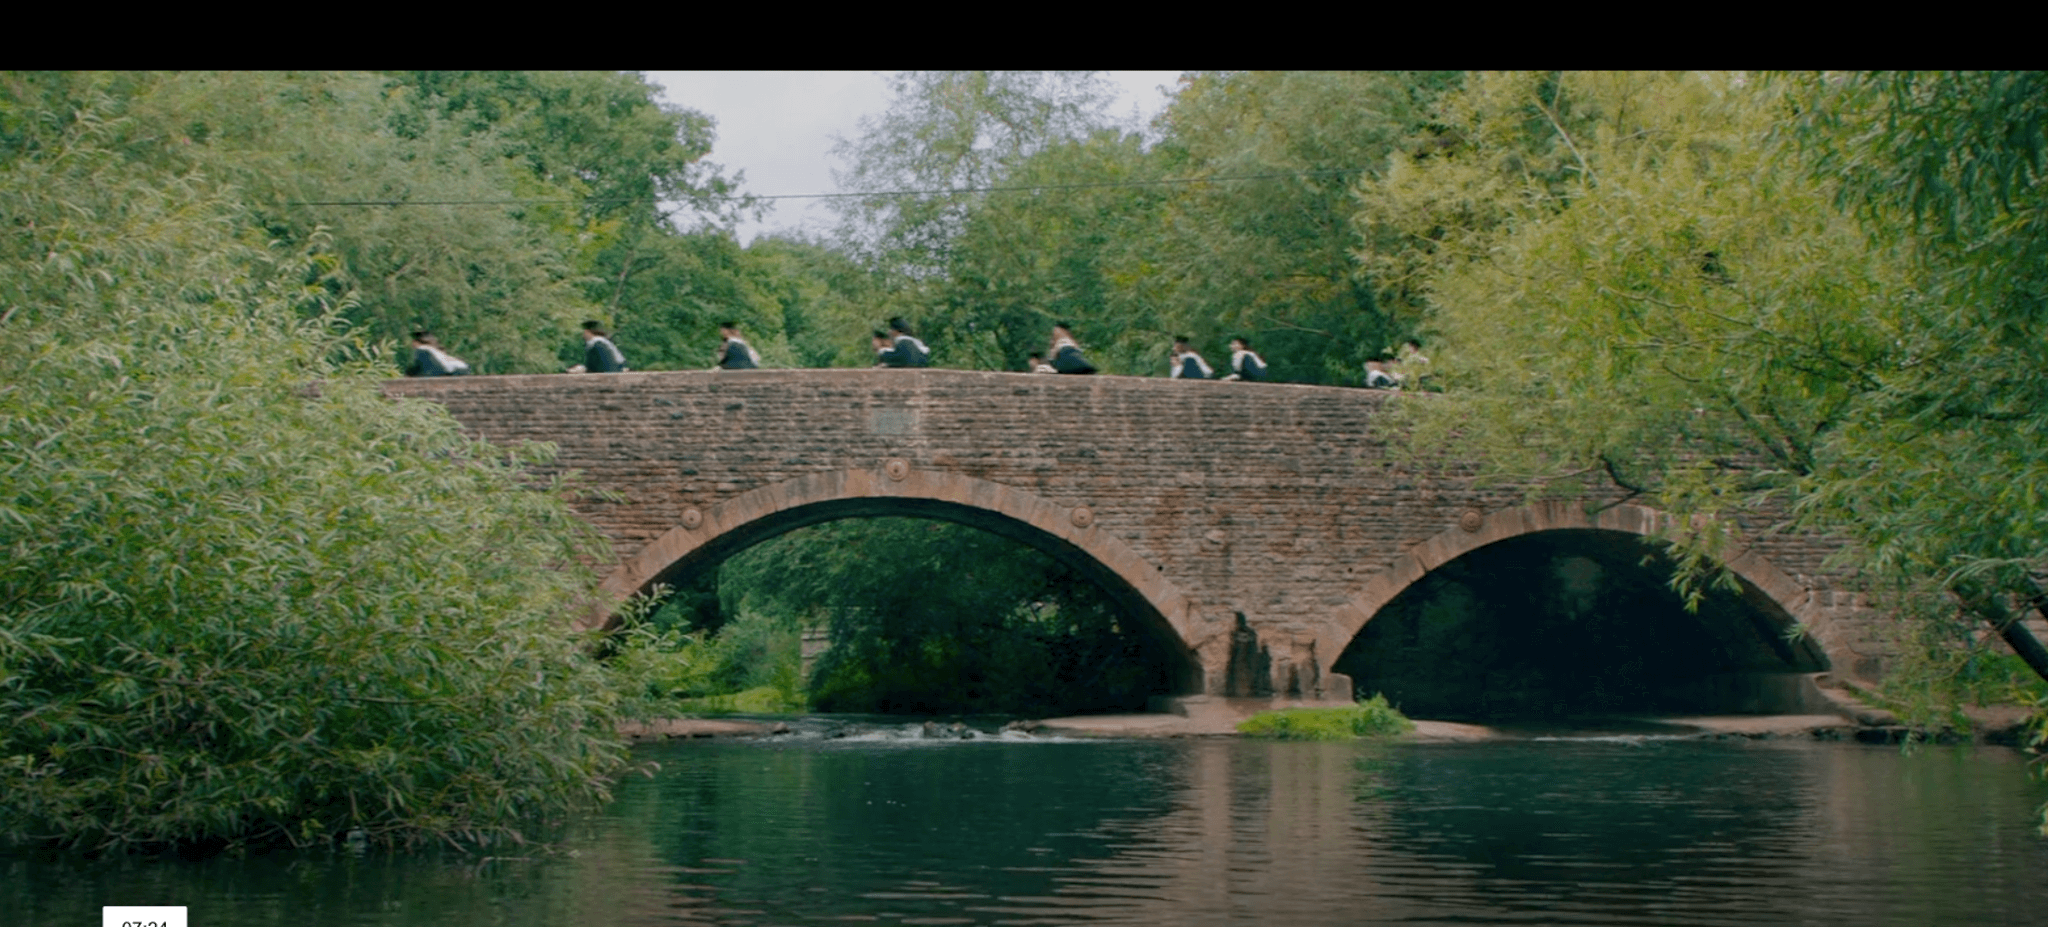 Image belongs to Universal Pictures. Cycling scene in England